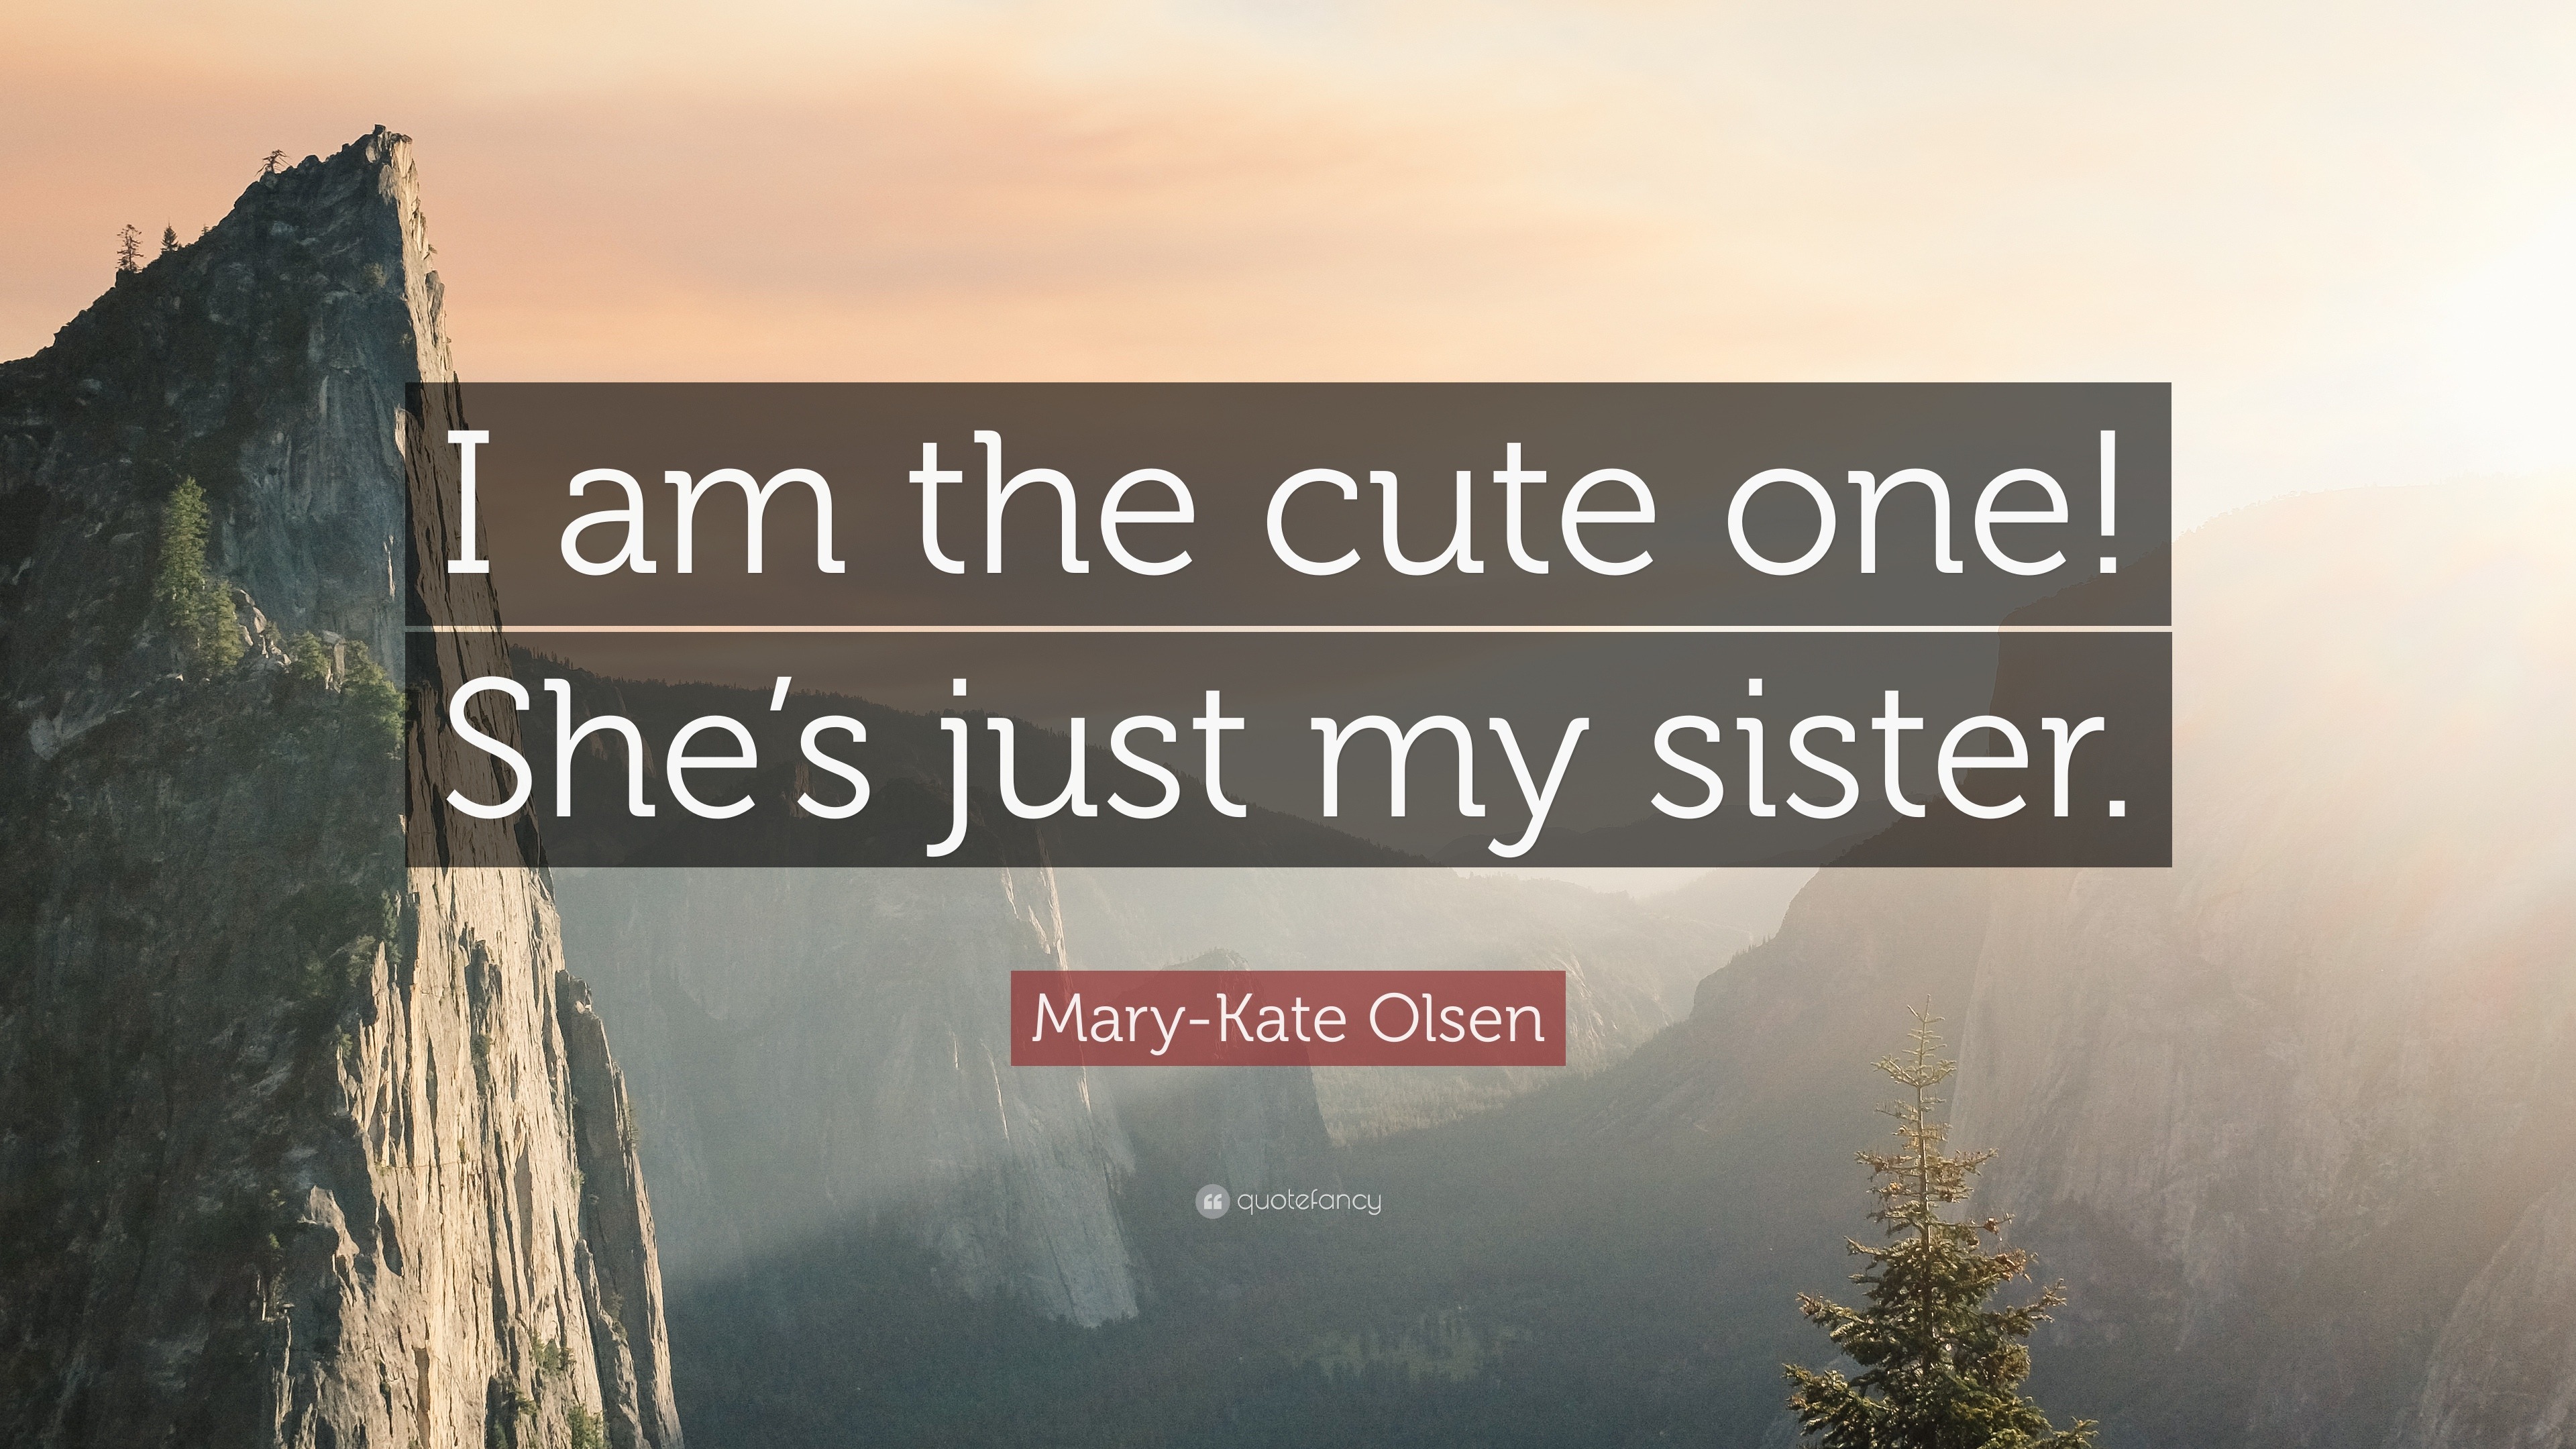 Mary-Kate Olsen Quote: “I am the cute one! She's just my sister.”